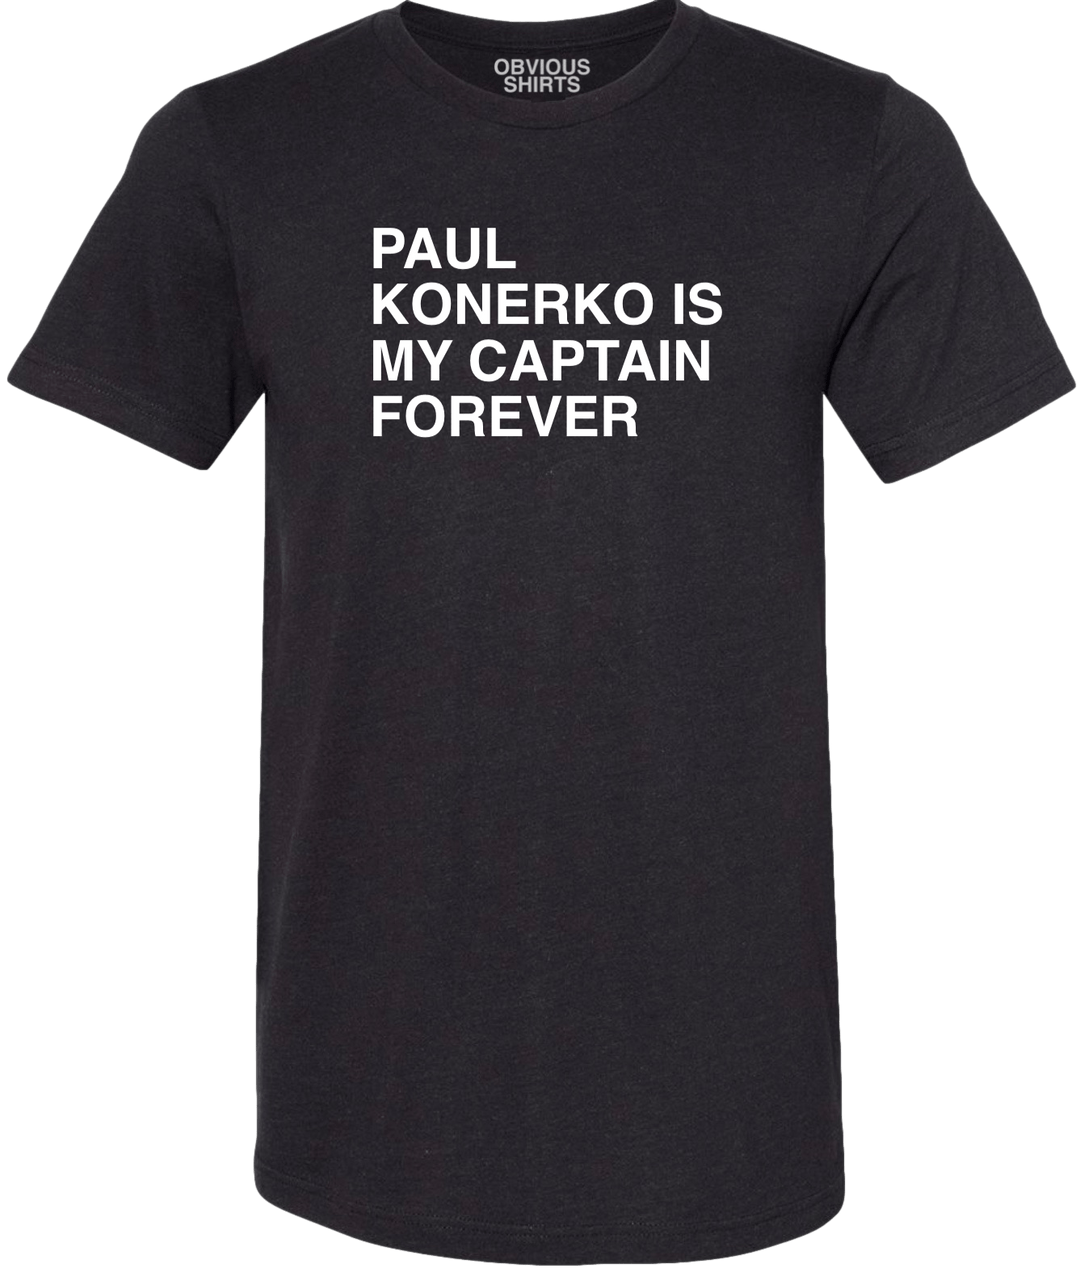 PAUL KONERKO IS MY CAPTAIN FOREVER. - OBVIOUS SHIRTS.